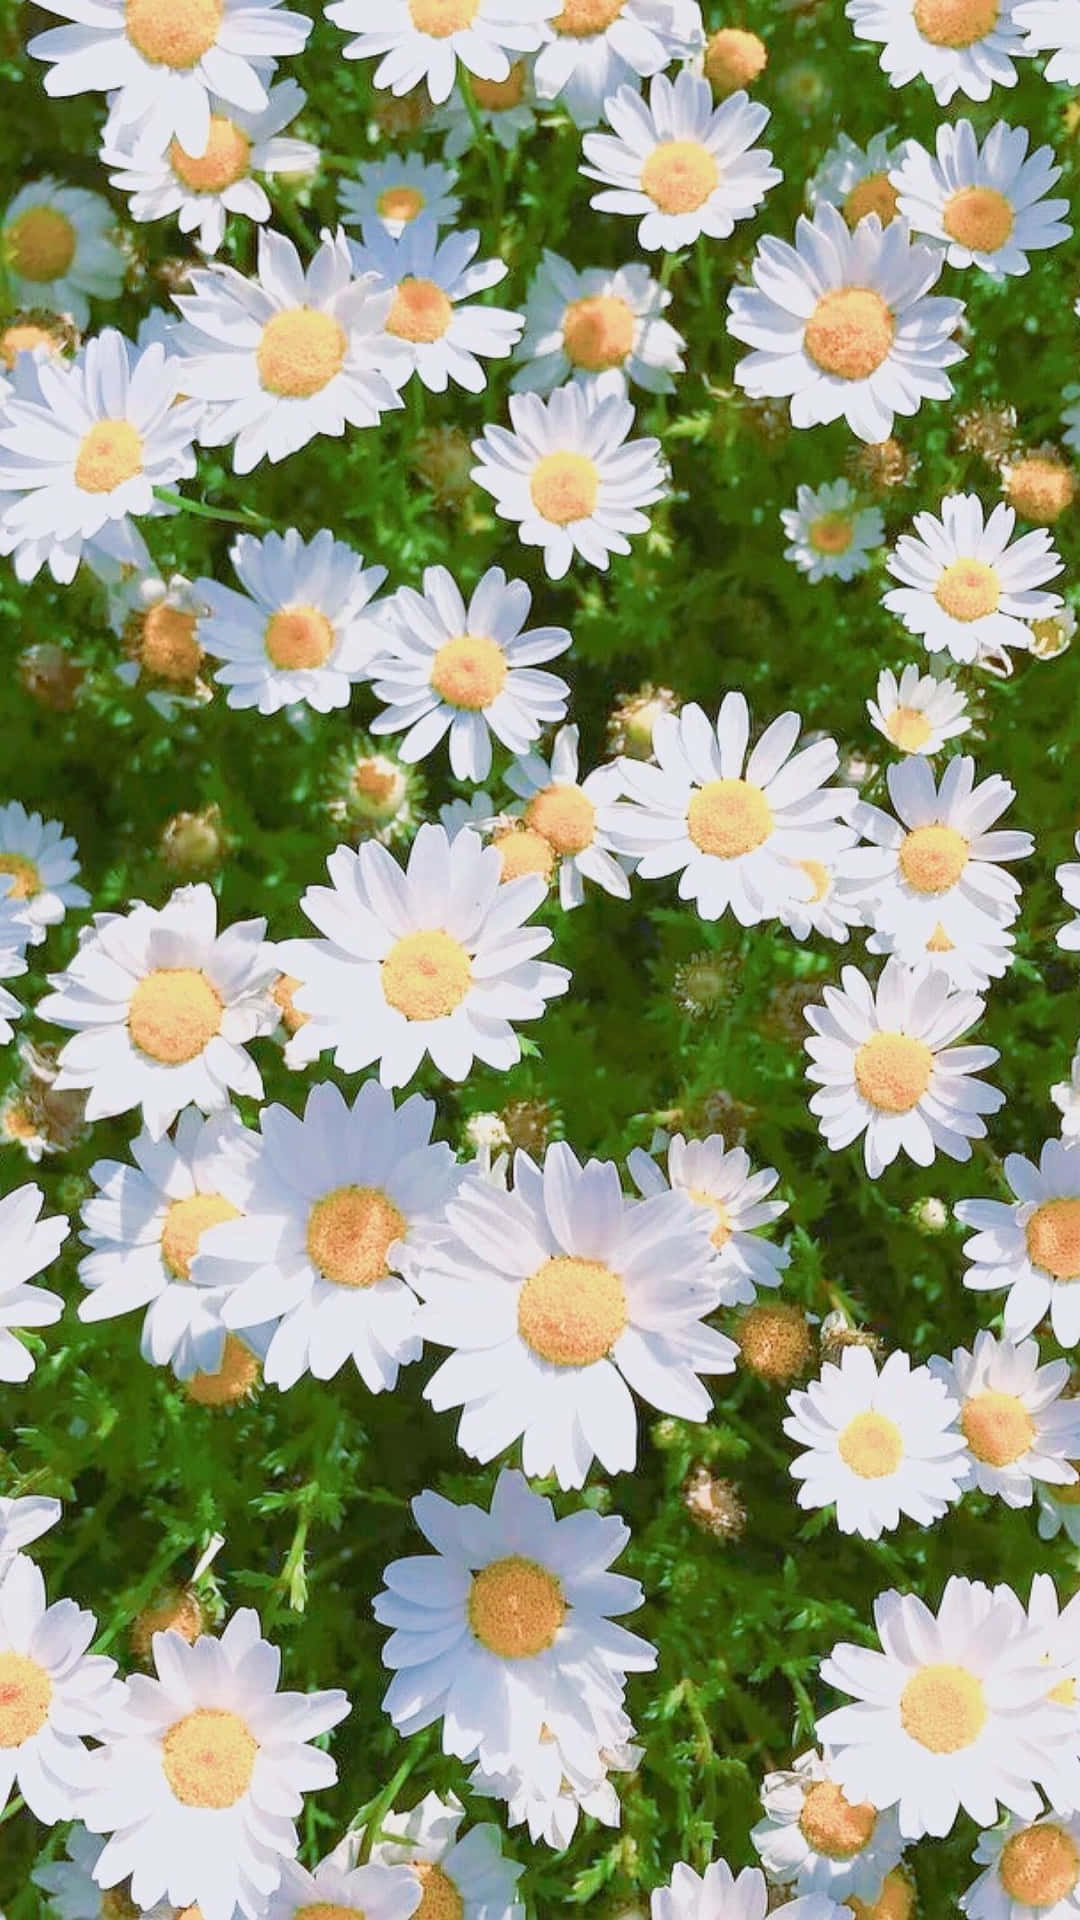 The beauty and simplicity of a Daisy Flower Wallpaper